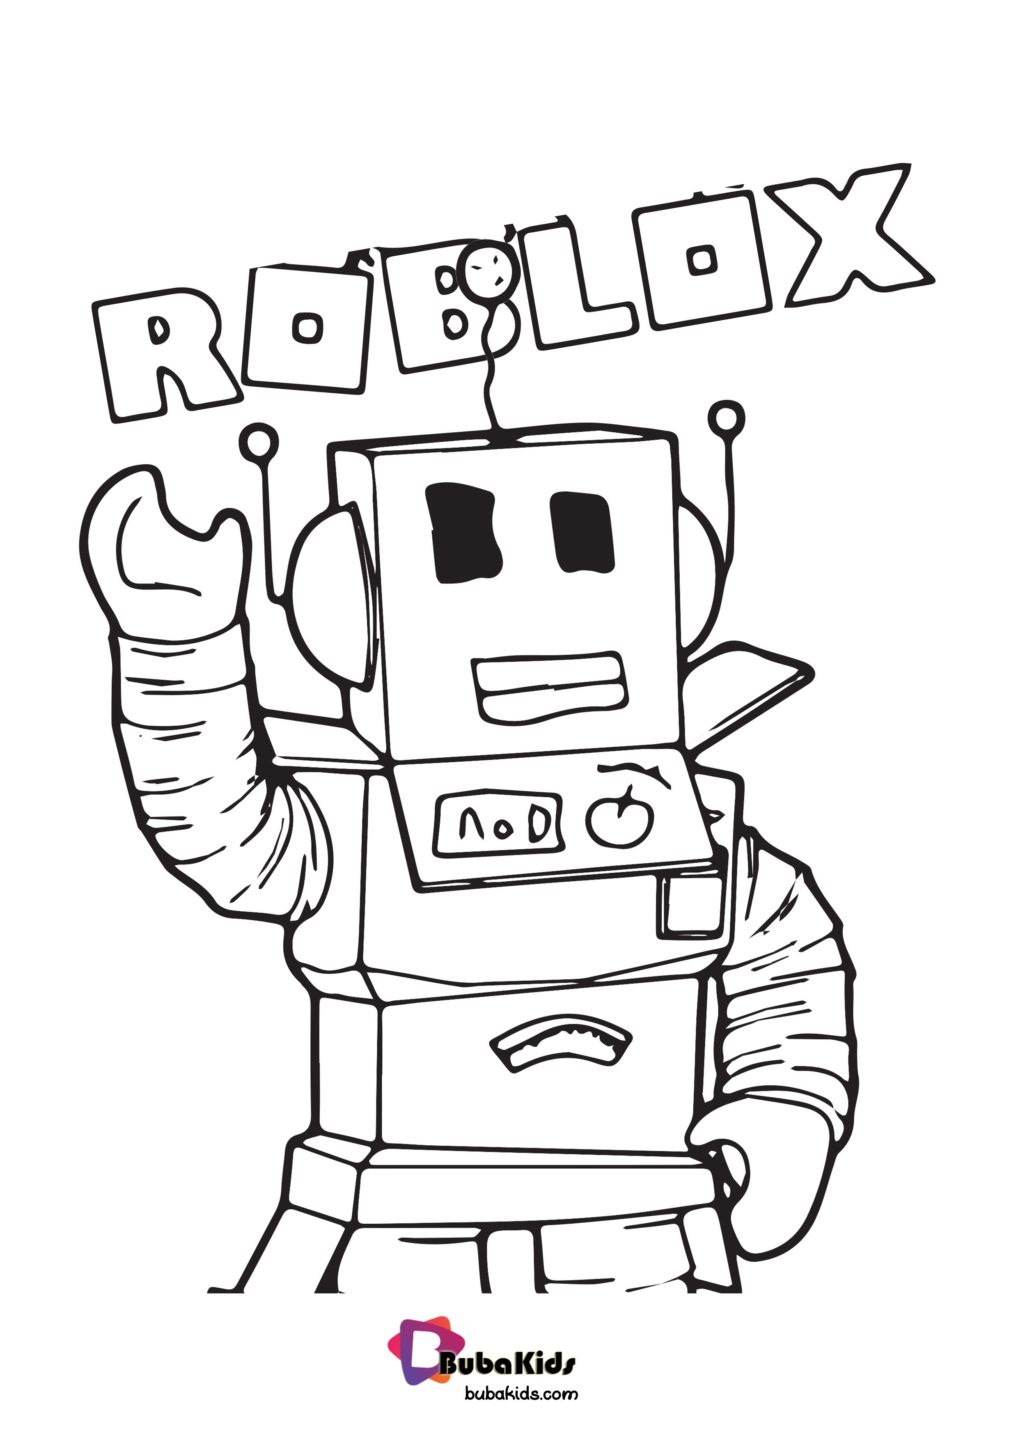 Download Roblox Coloring Page | BubaKids.com